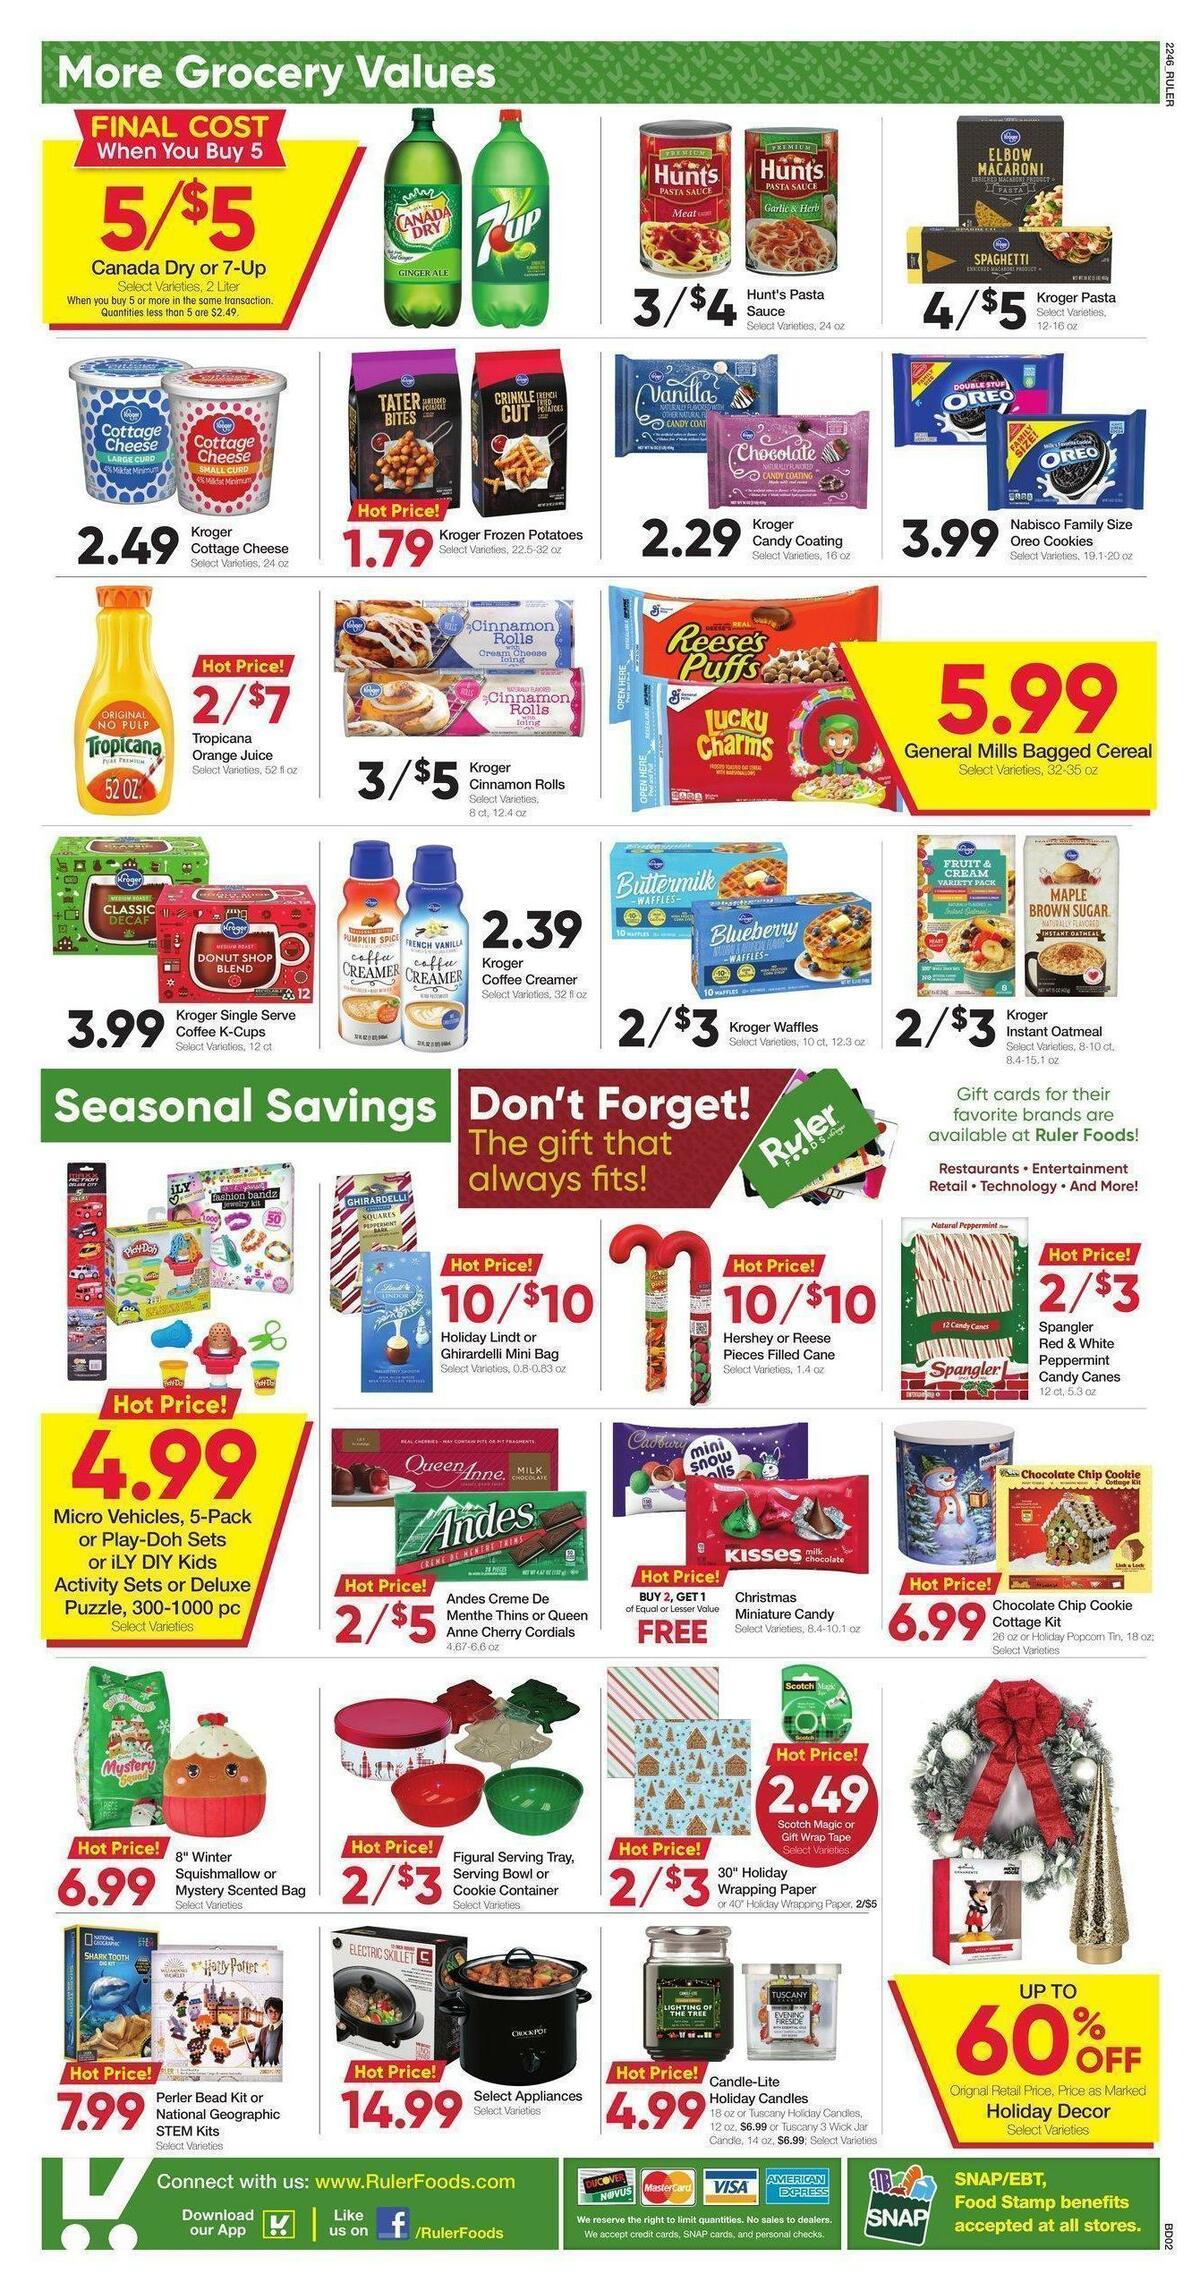 Ruler Foods Weekly Ad from December 14